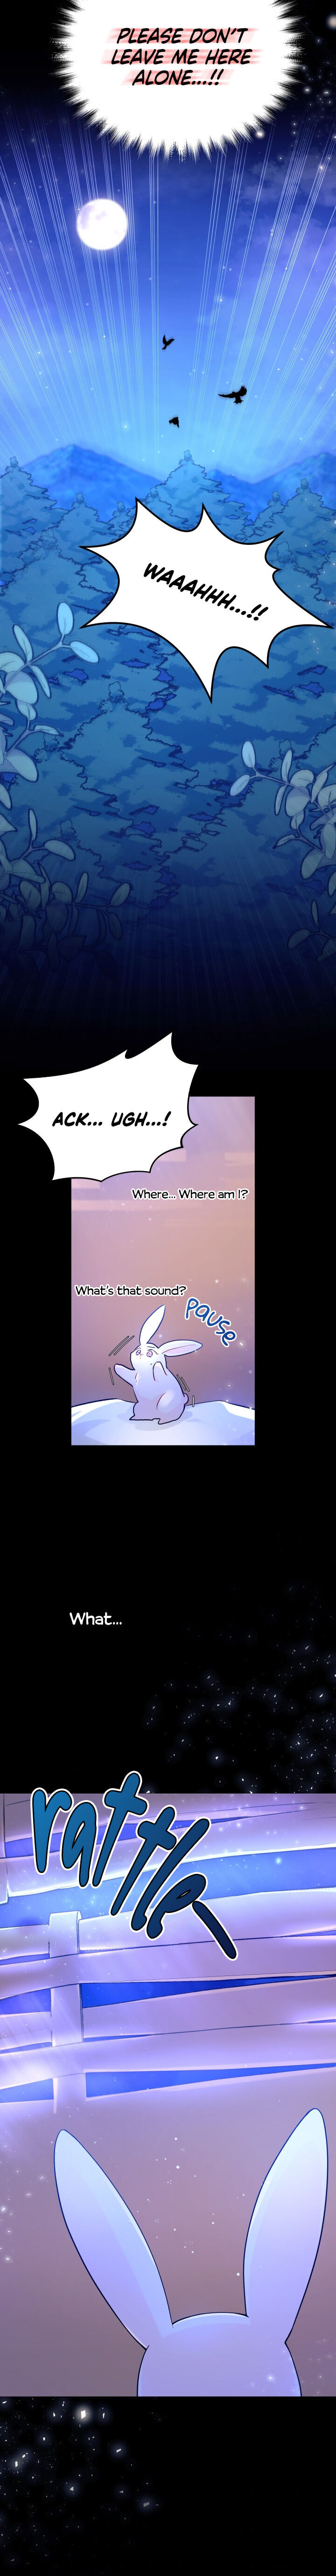 A Symbiotic Relationship Between A Rabbit And A Black Panther - Chapter 1 Page 10